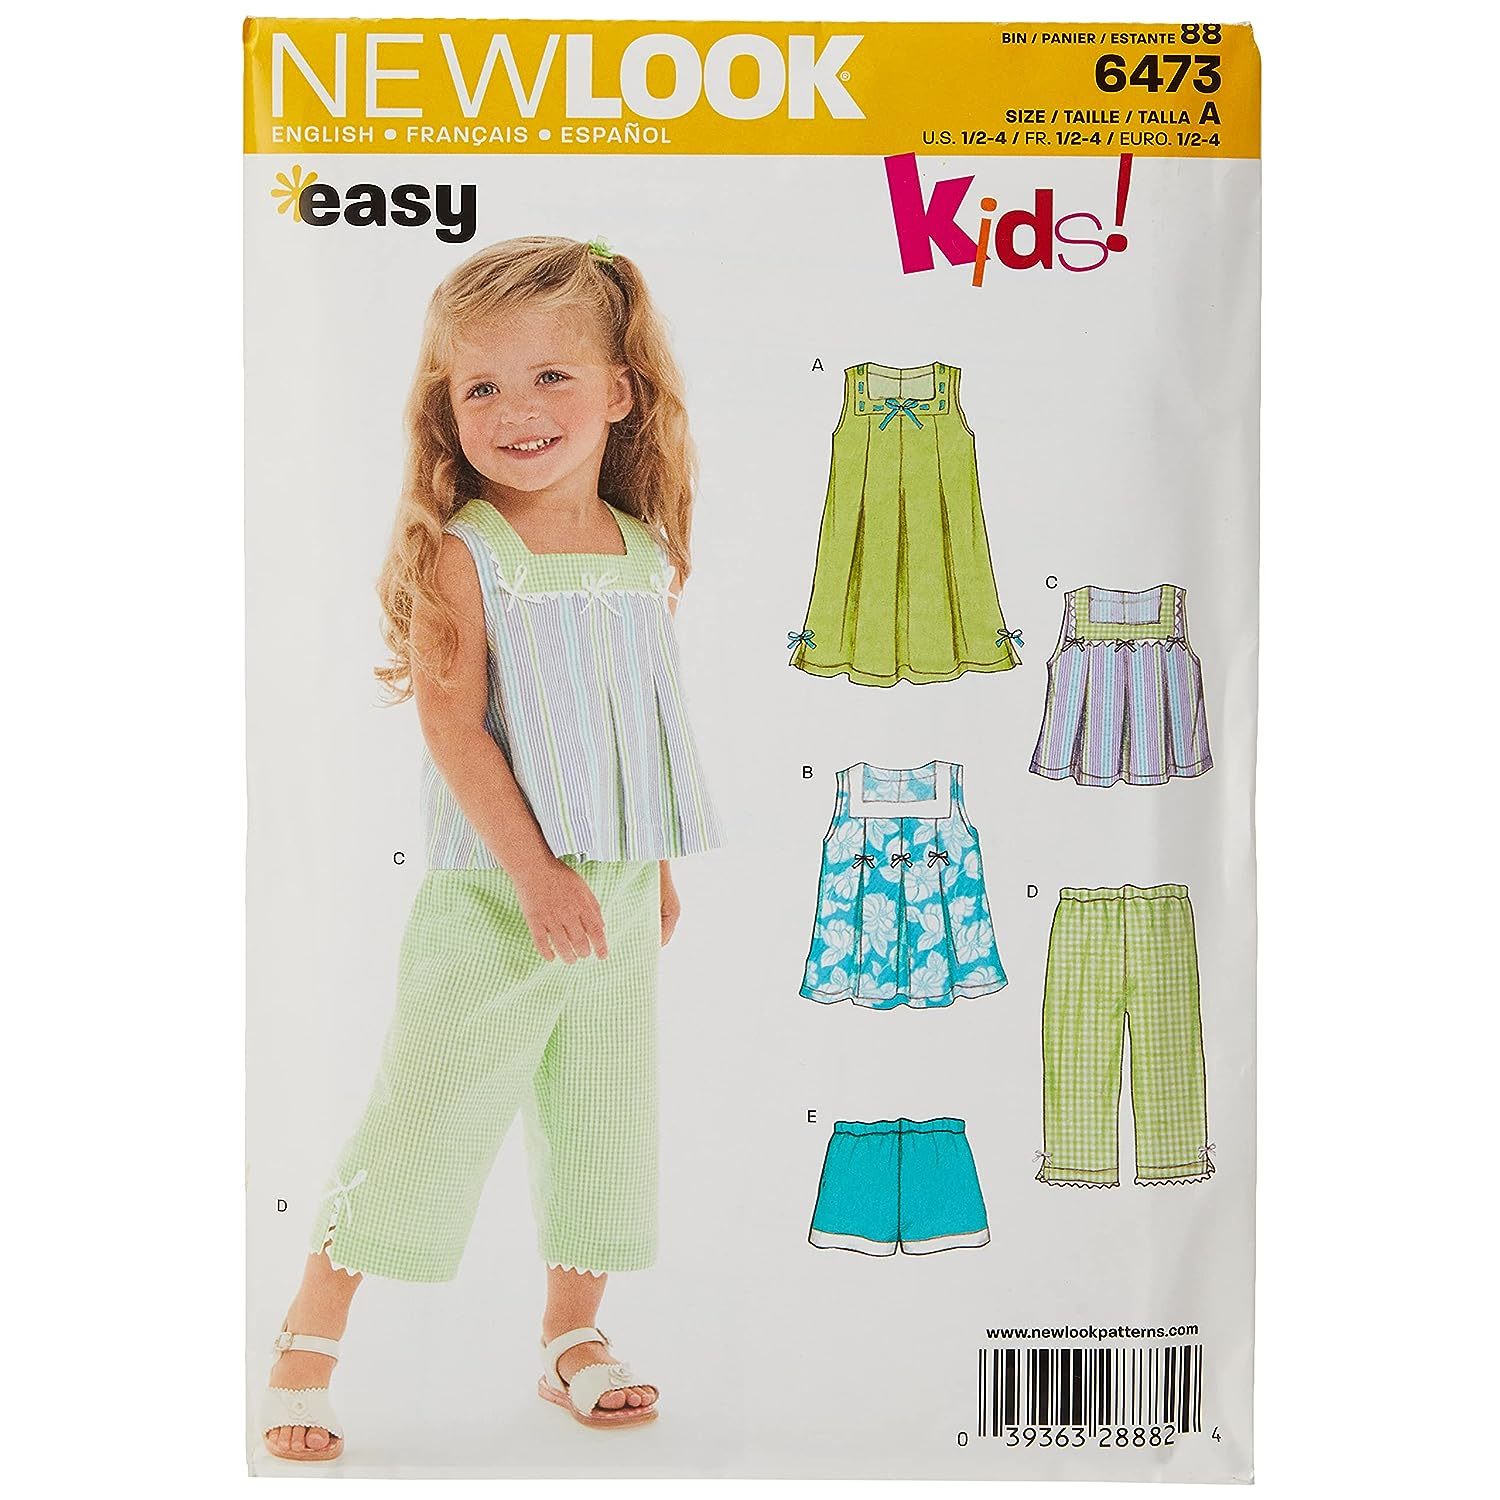 Primary image for New Look Sewing Pattern 6473 Toddler Separates, Size A (1/2-1-2-3-4)